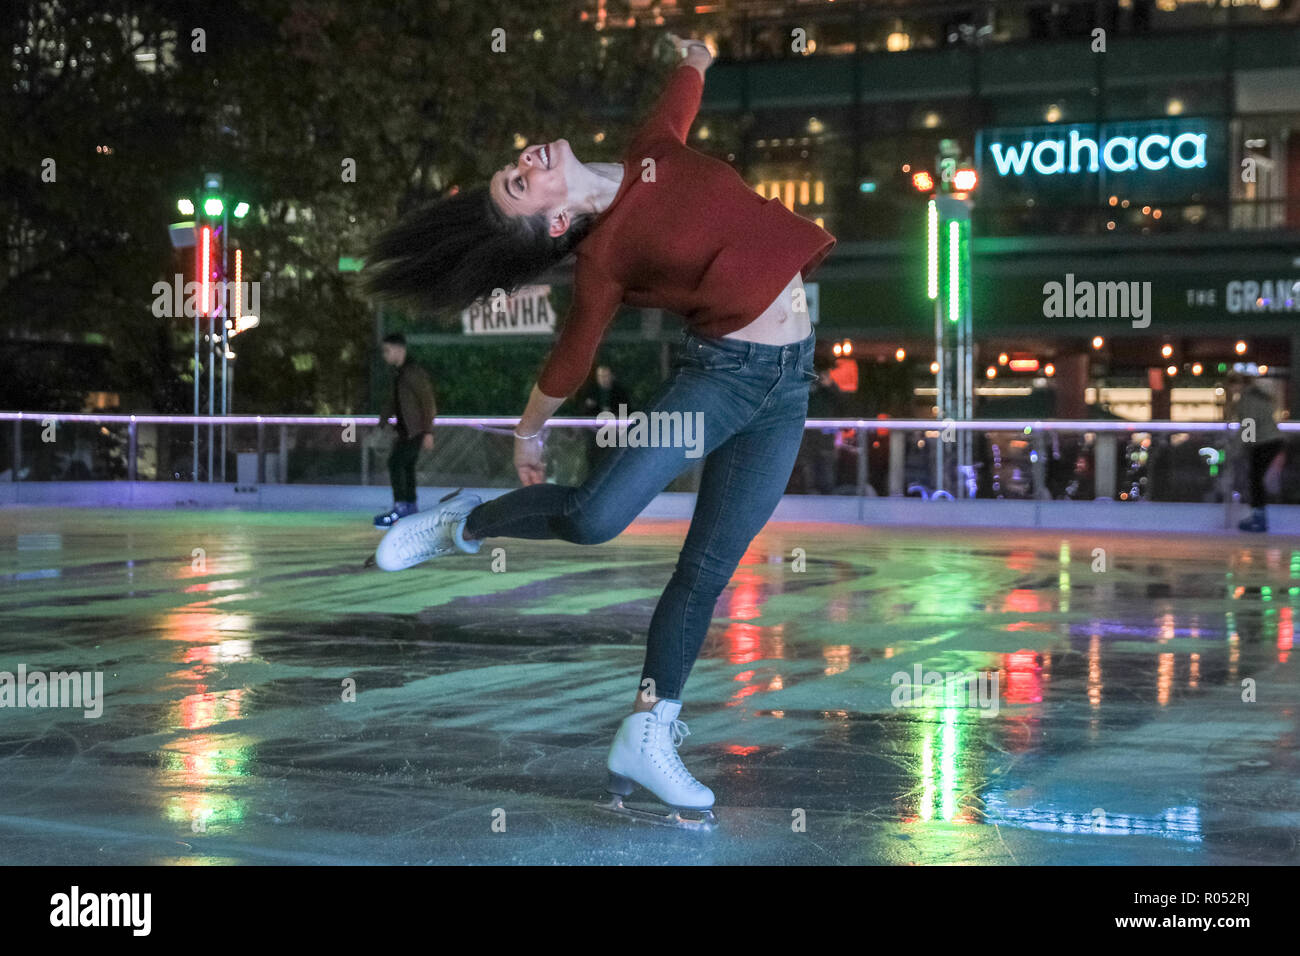 Canary Wharf, London, UK, 1st Nov 2018. Vanessa Bauer, pro figure skater  who won the TV Series 'Dancing on Ice' last year, performs a routine on the  ice. The Canary Wharf ice